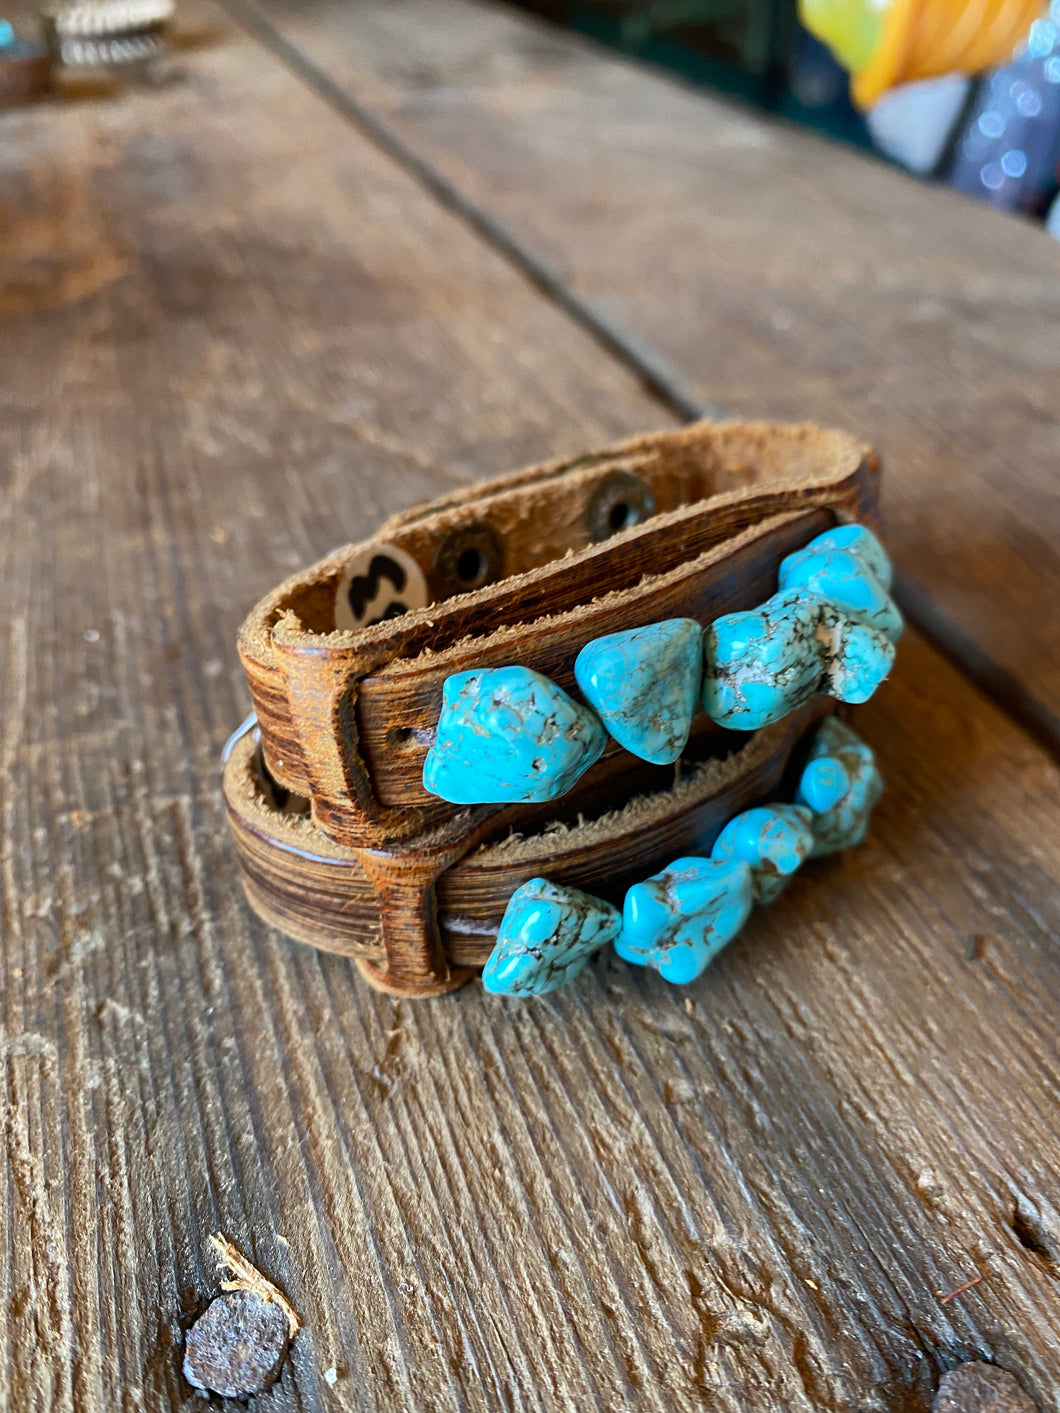 Dusty Leather Narrow Cuff with Seafoam Green Turquoise Chunks 011i